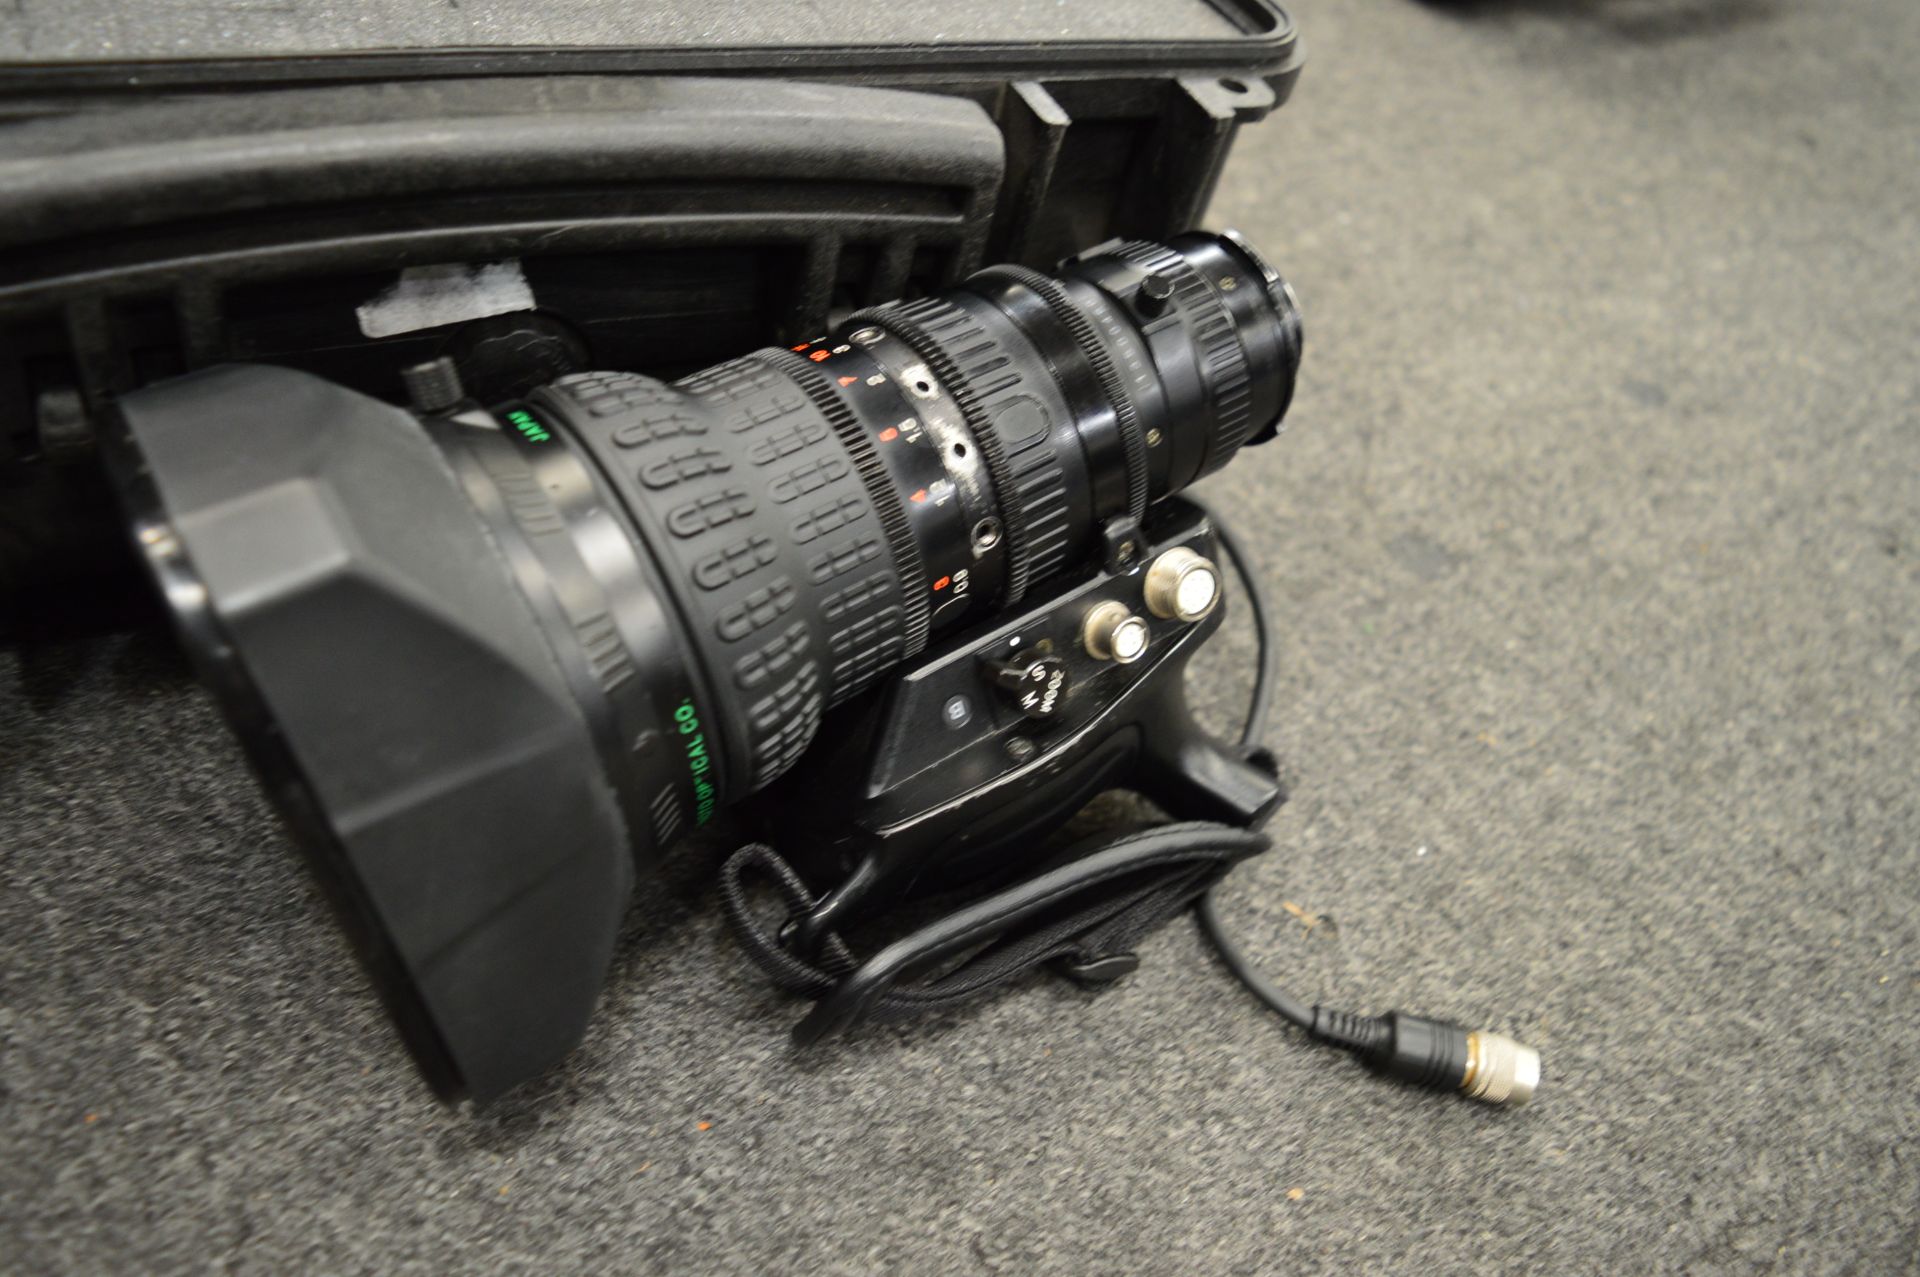 Fujinon, A20 x 8.6BRM-SD 1:1.8/8.6-172mm zoom lens - Image 2 of 3